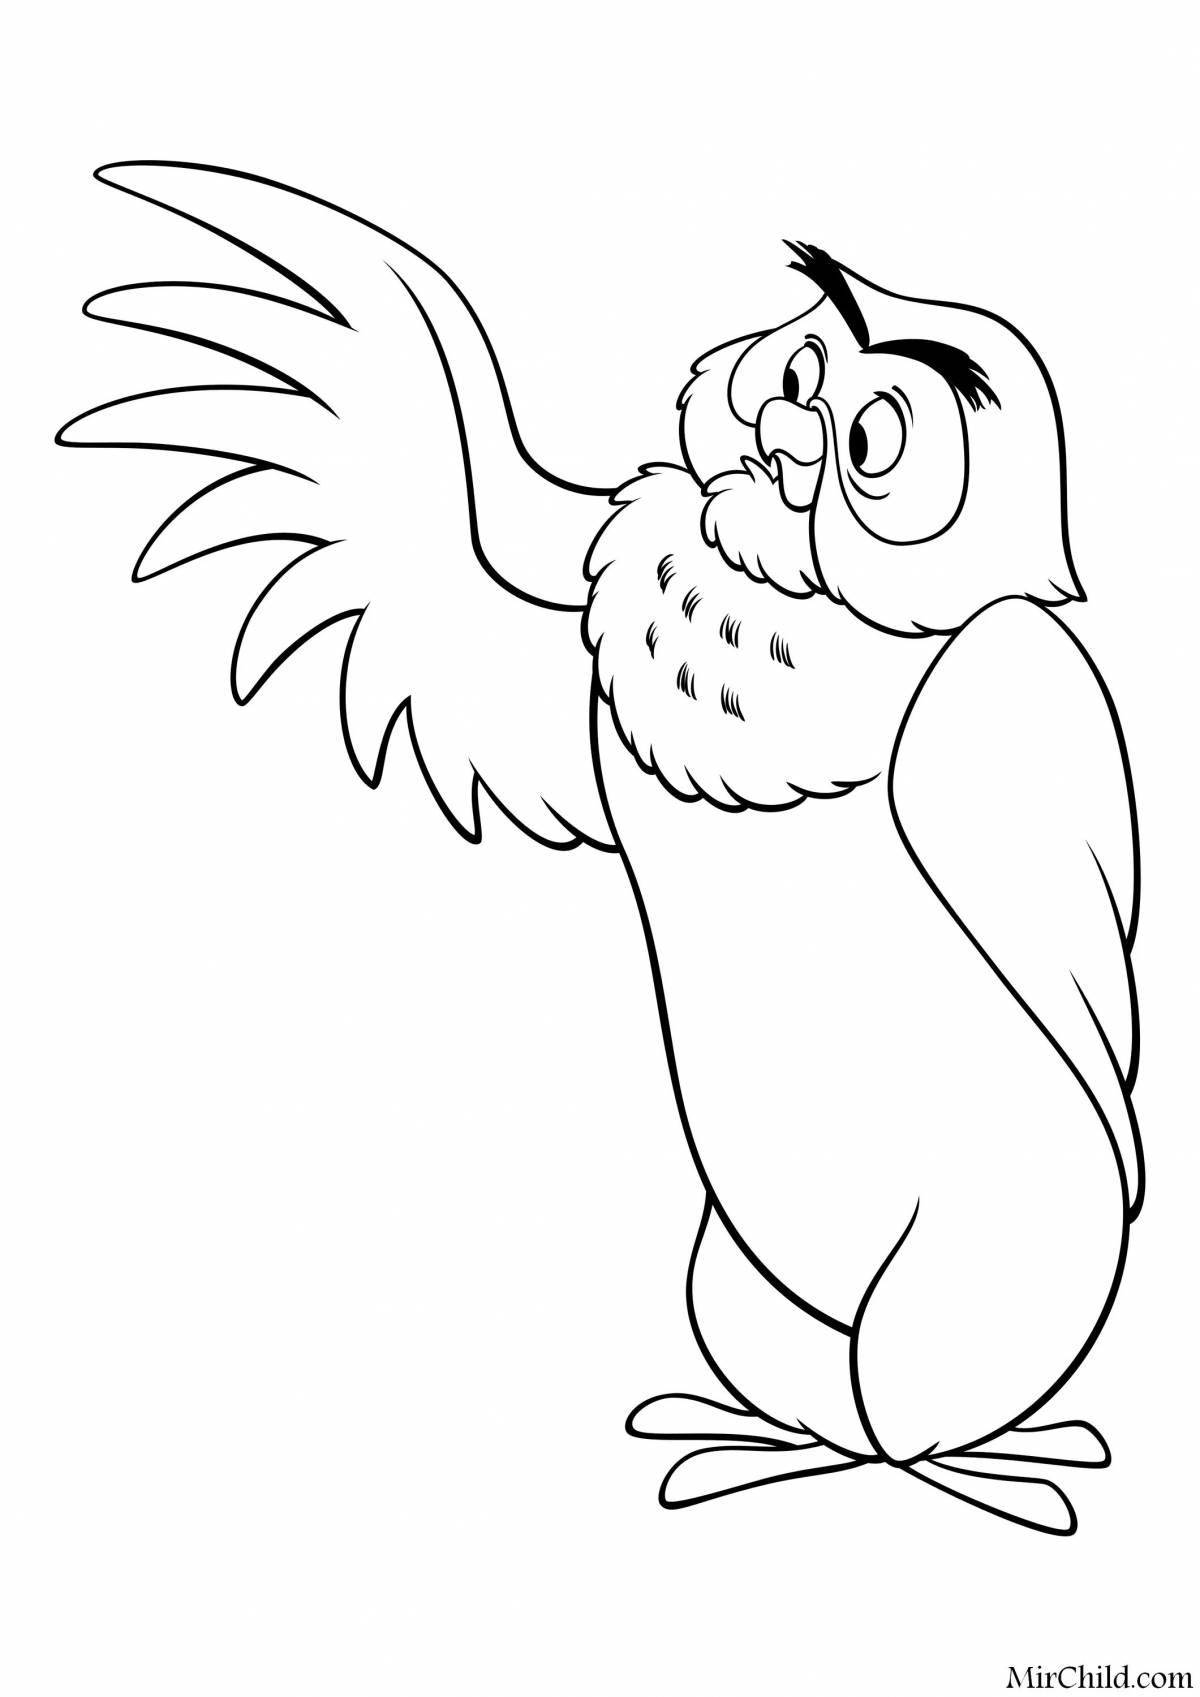 Charming winnie the pooh owl coloring book